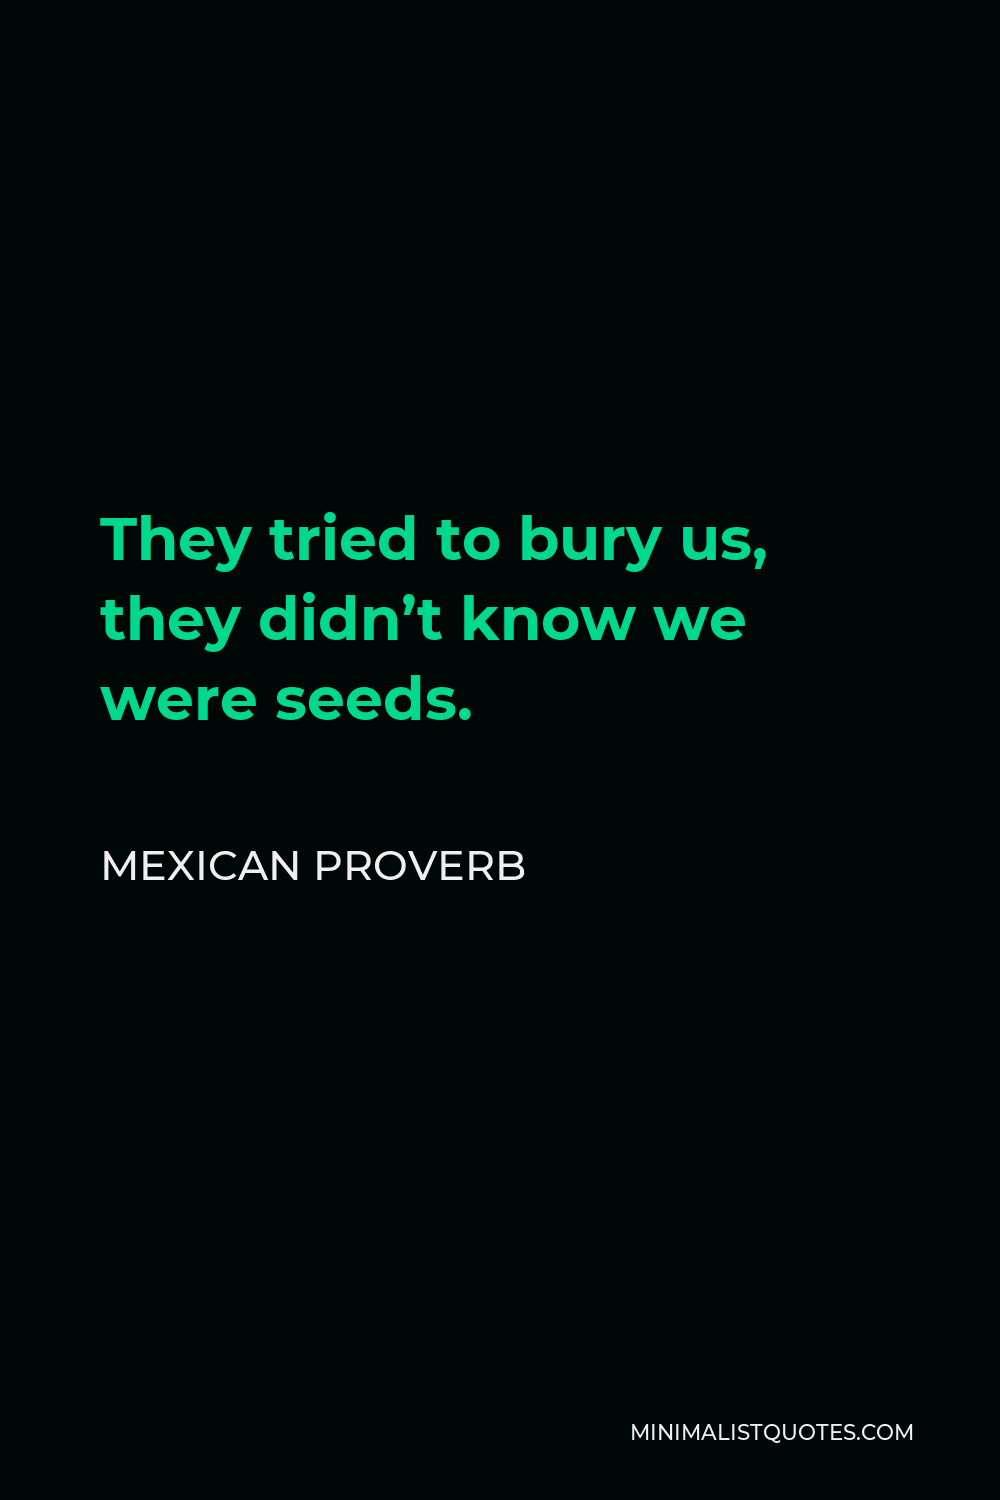 Mexican Proverb Quote - They tried to bury us, they didn’t know we were seeds.